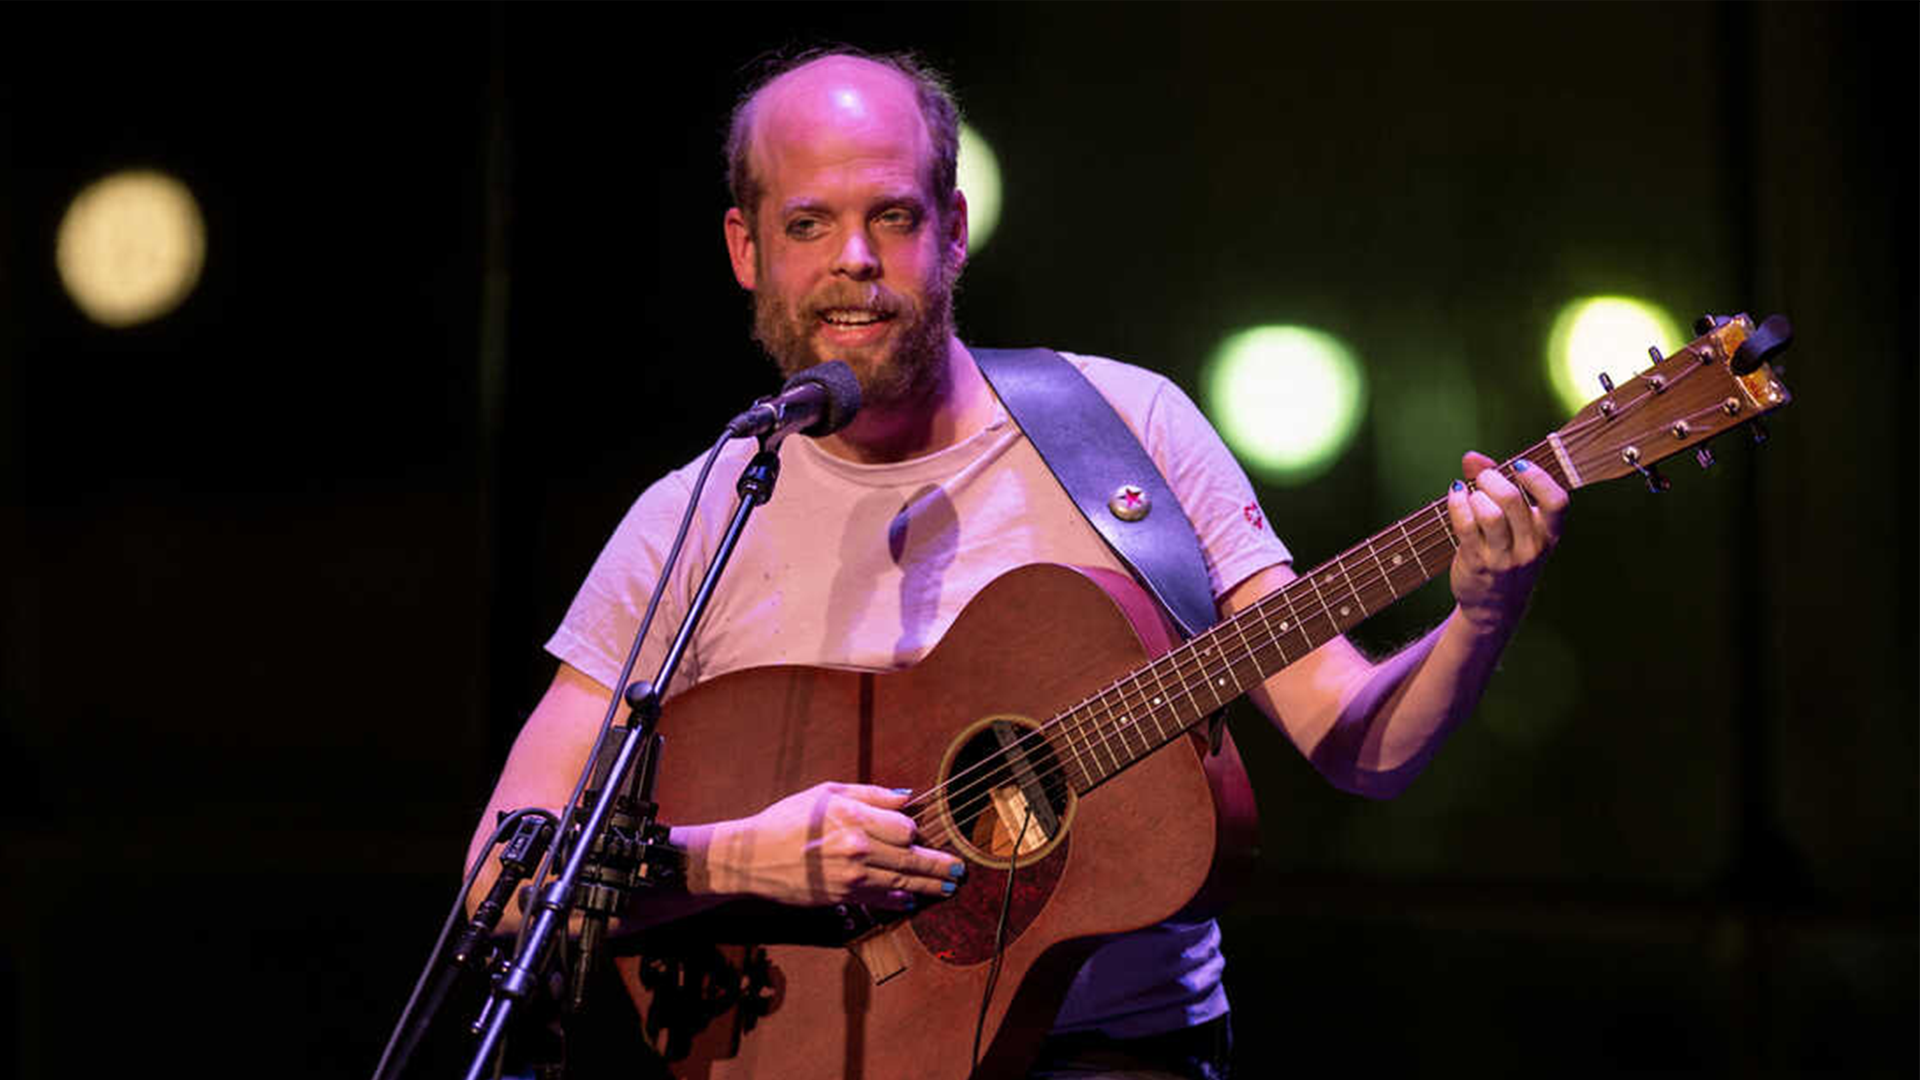 Bonnie Prince Billy playing guitar on stage